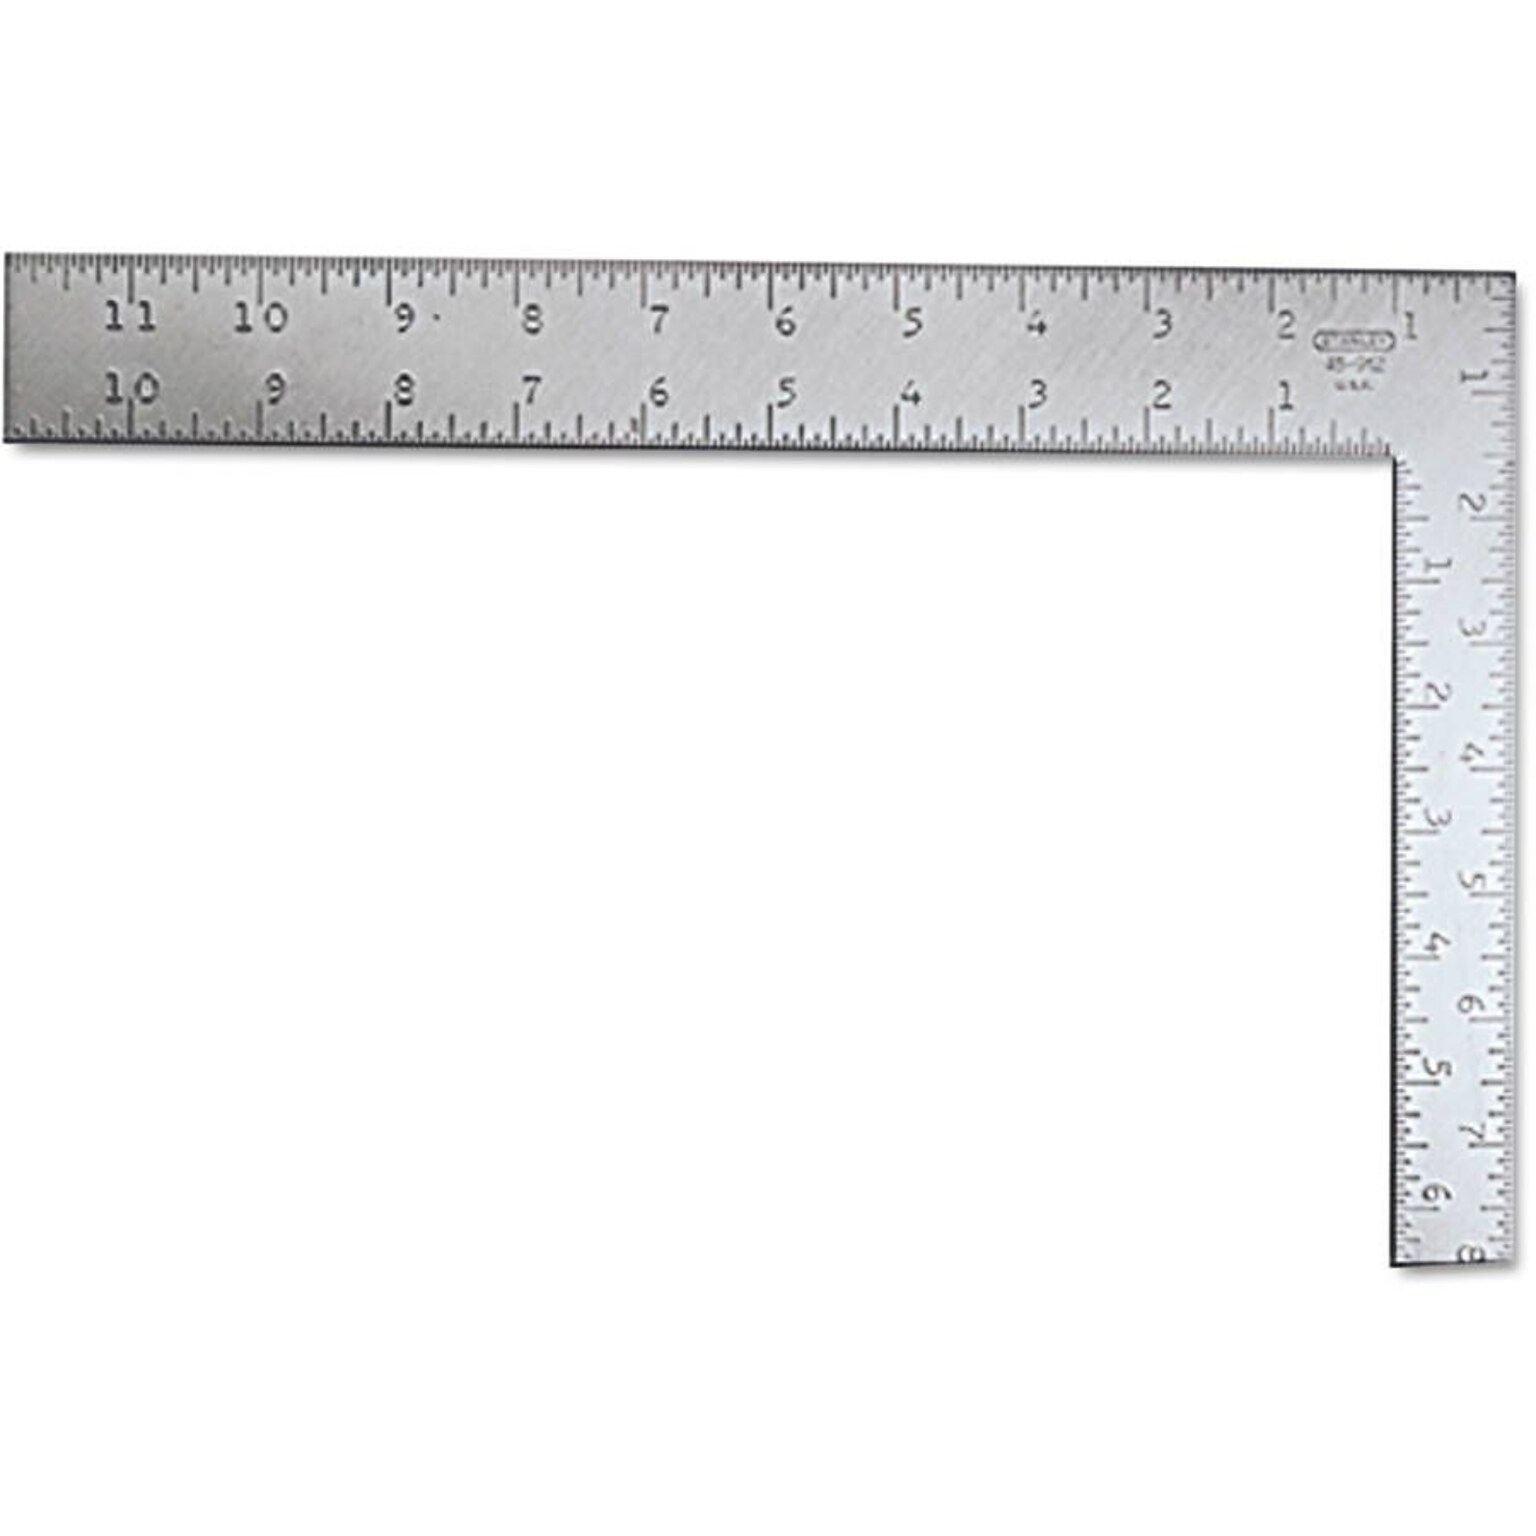 Stanley® Flat Rafter Square, 12 in (L) x 1 1/2 in (W) x 0.1 in (T) Blade